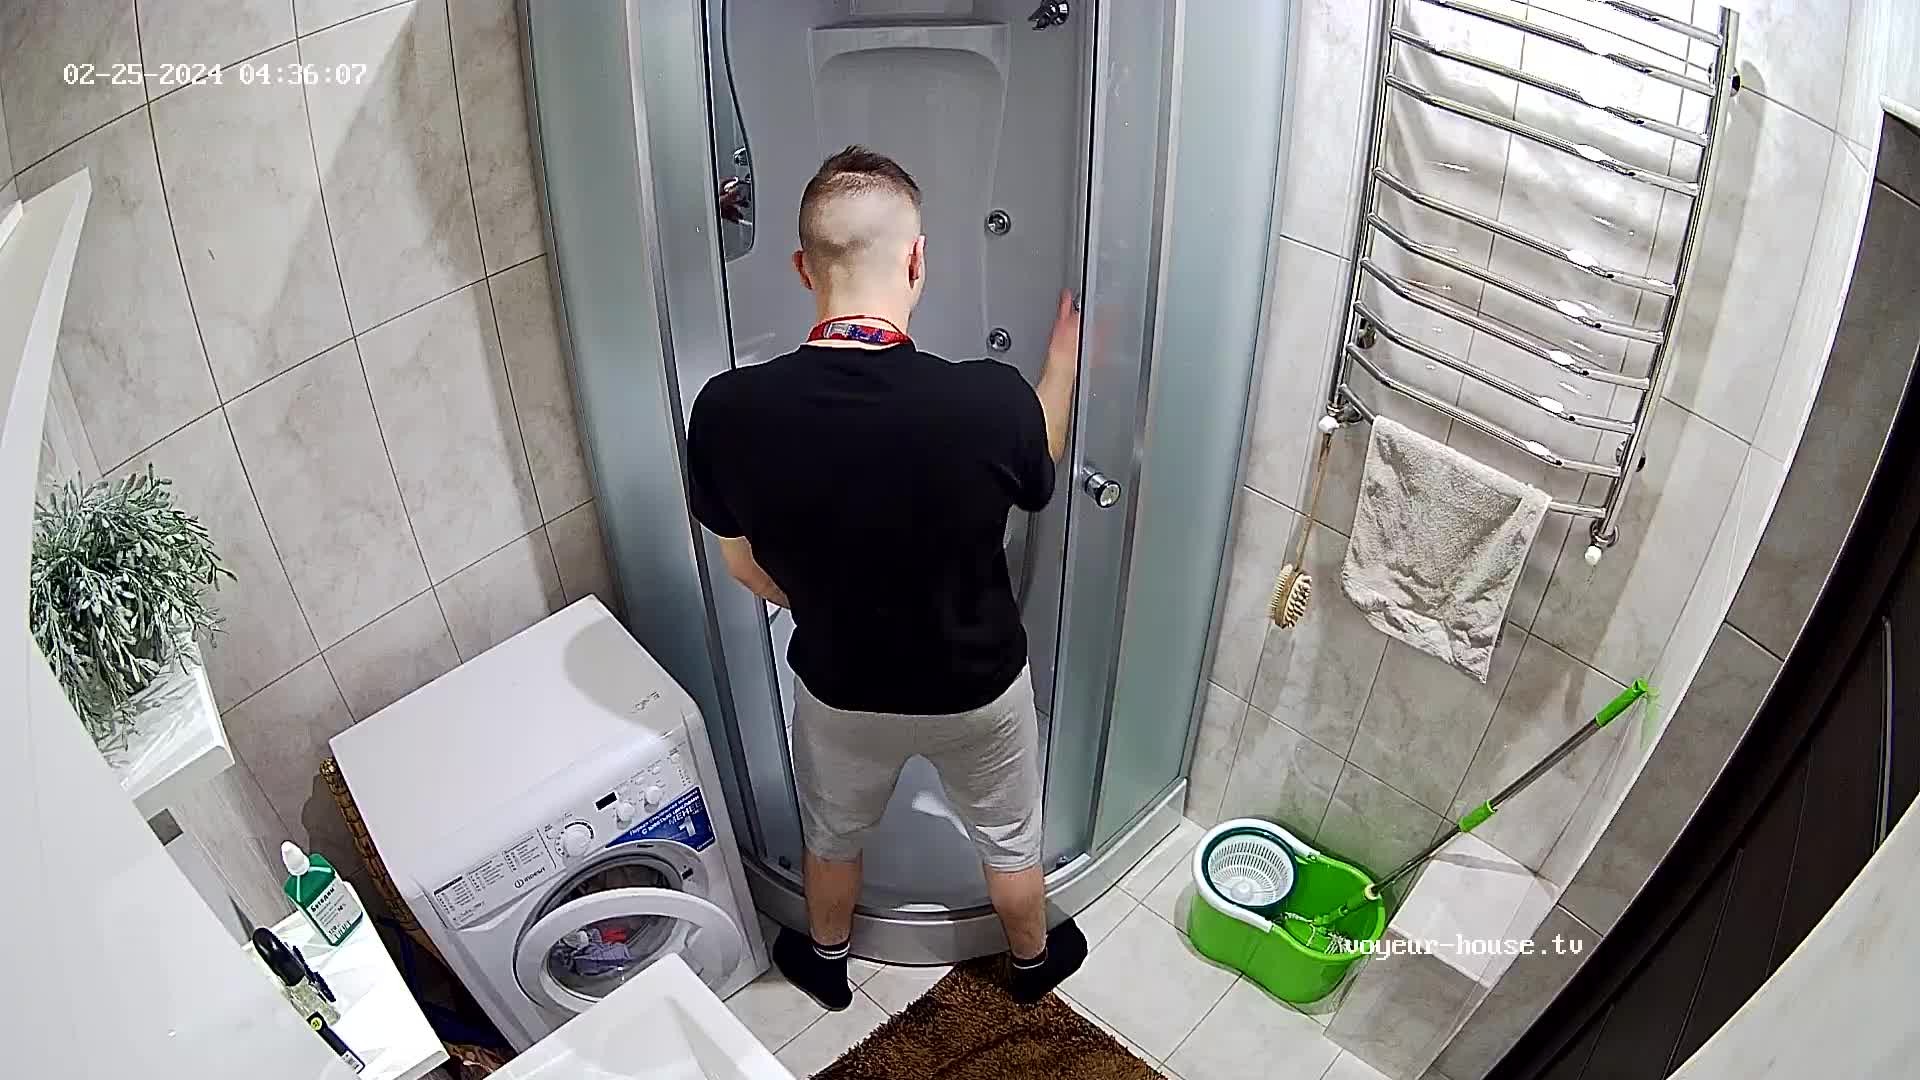 Neil piss in the shower 25-02-2024